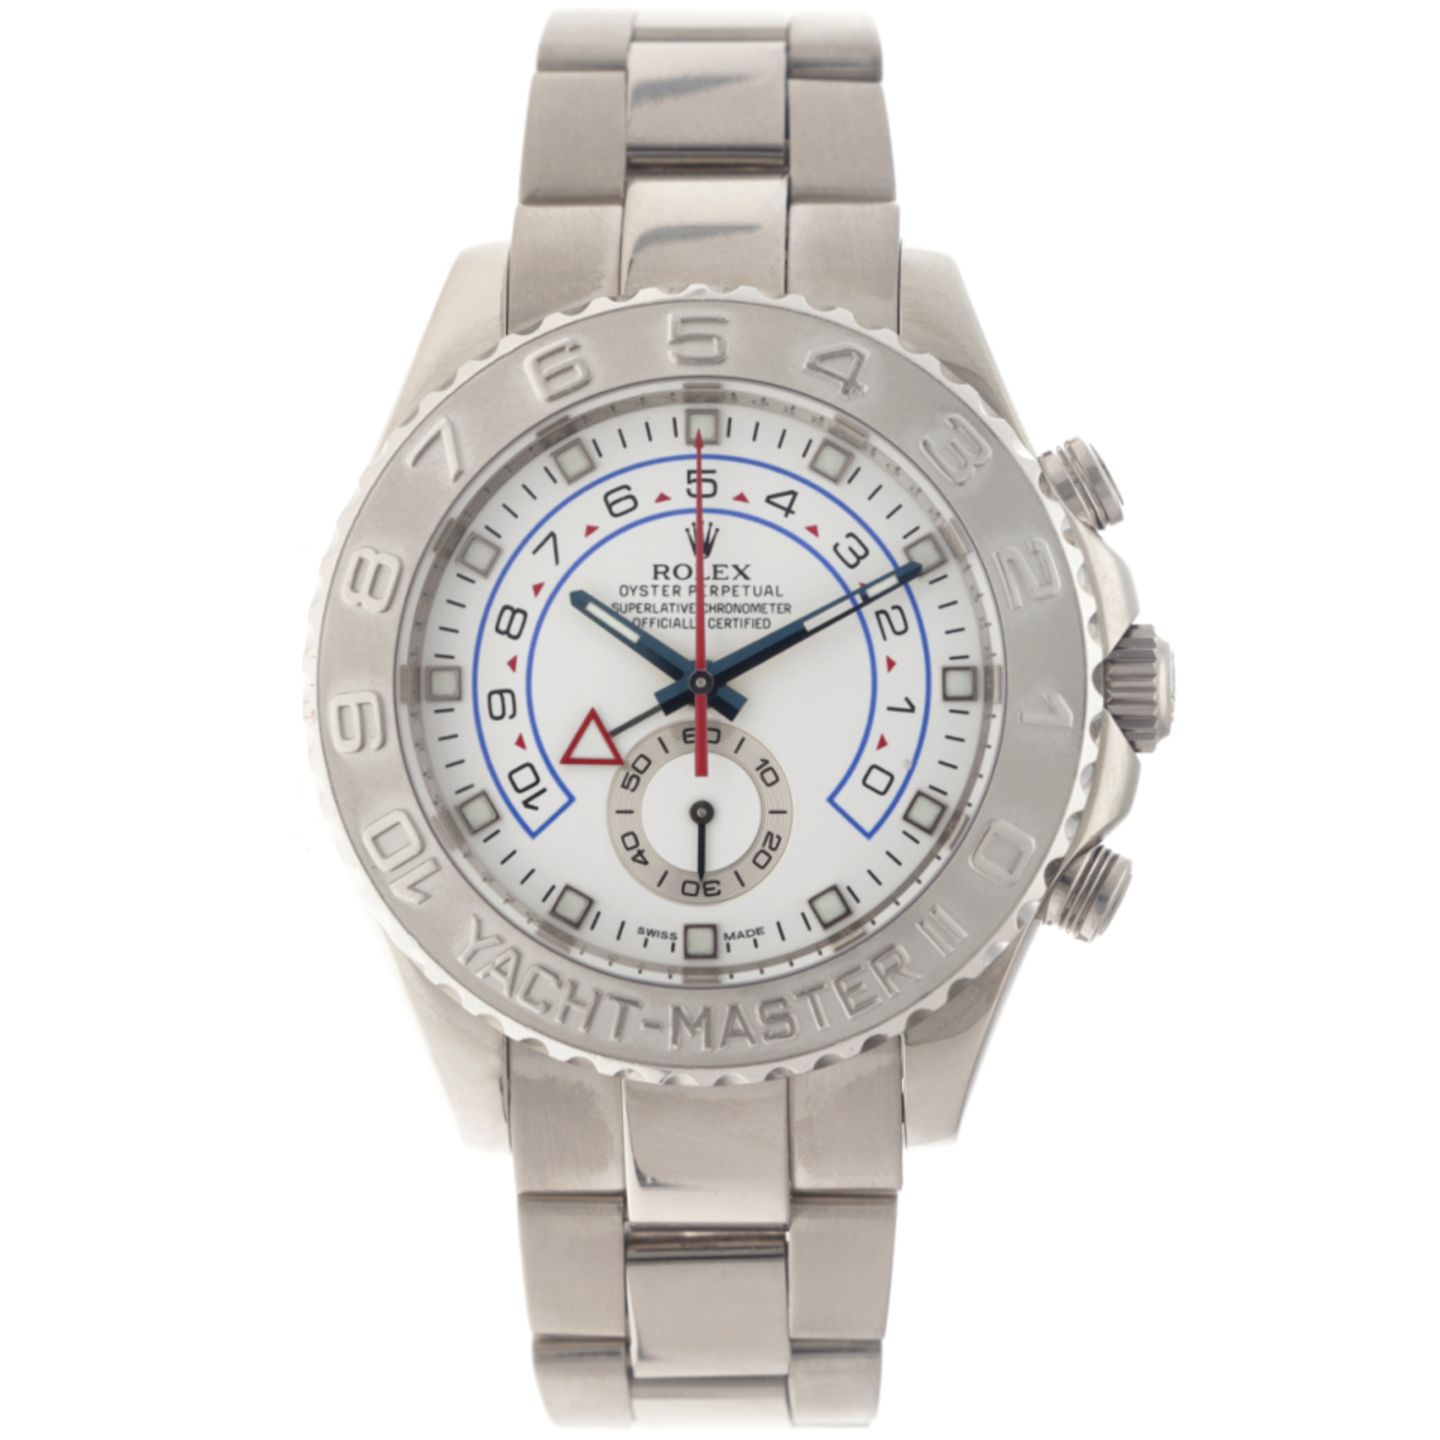 Rolex Yacht-Master II 116689 (2012) - White dial 44 mm White Gold case (1/6)